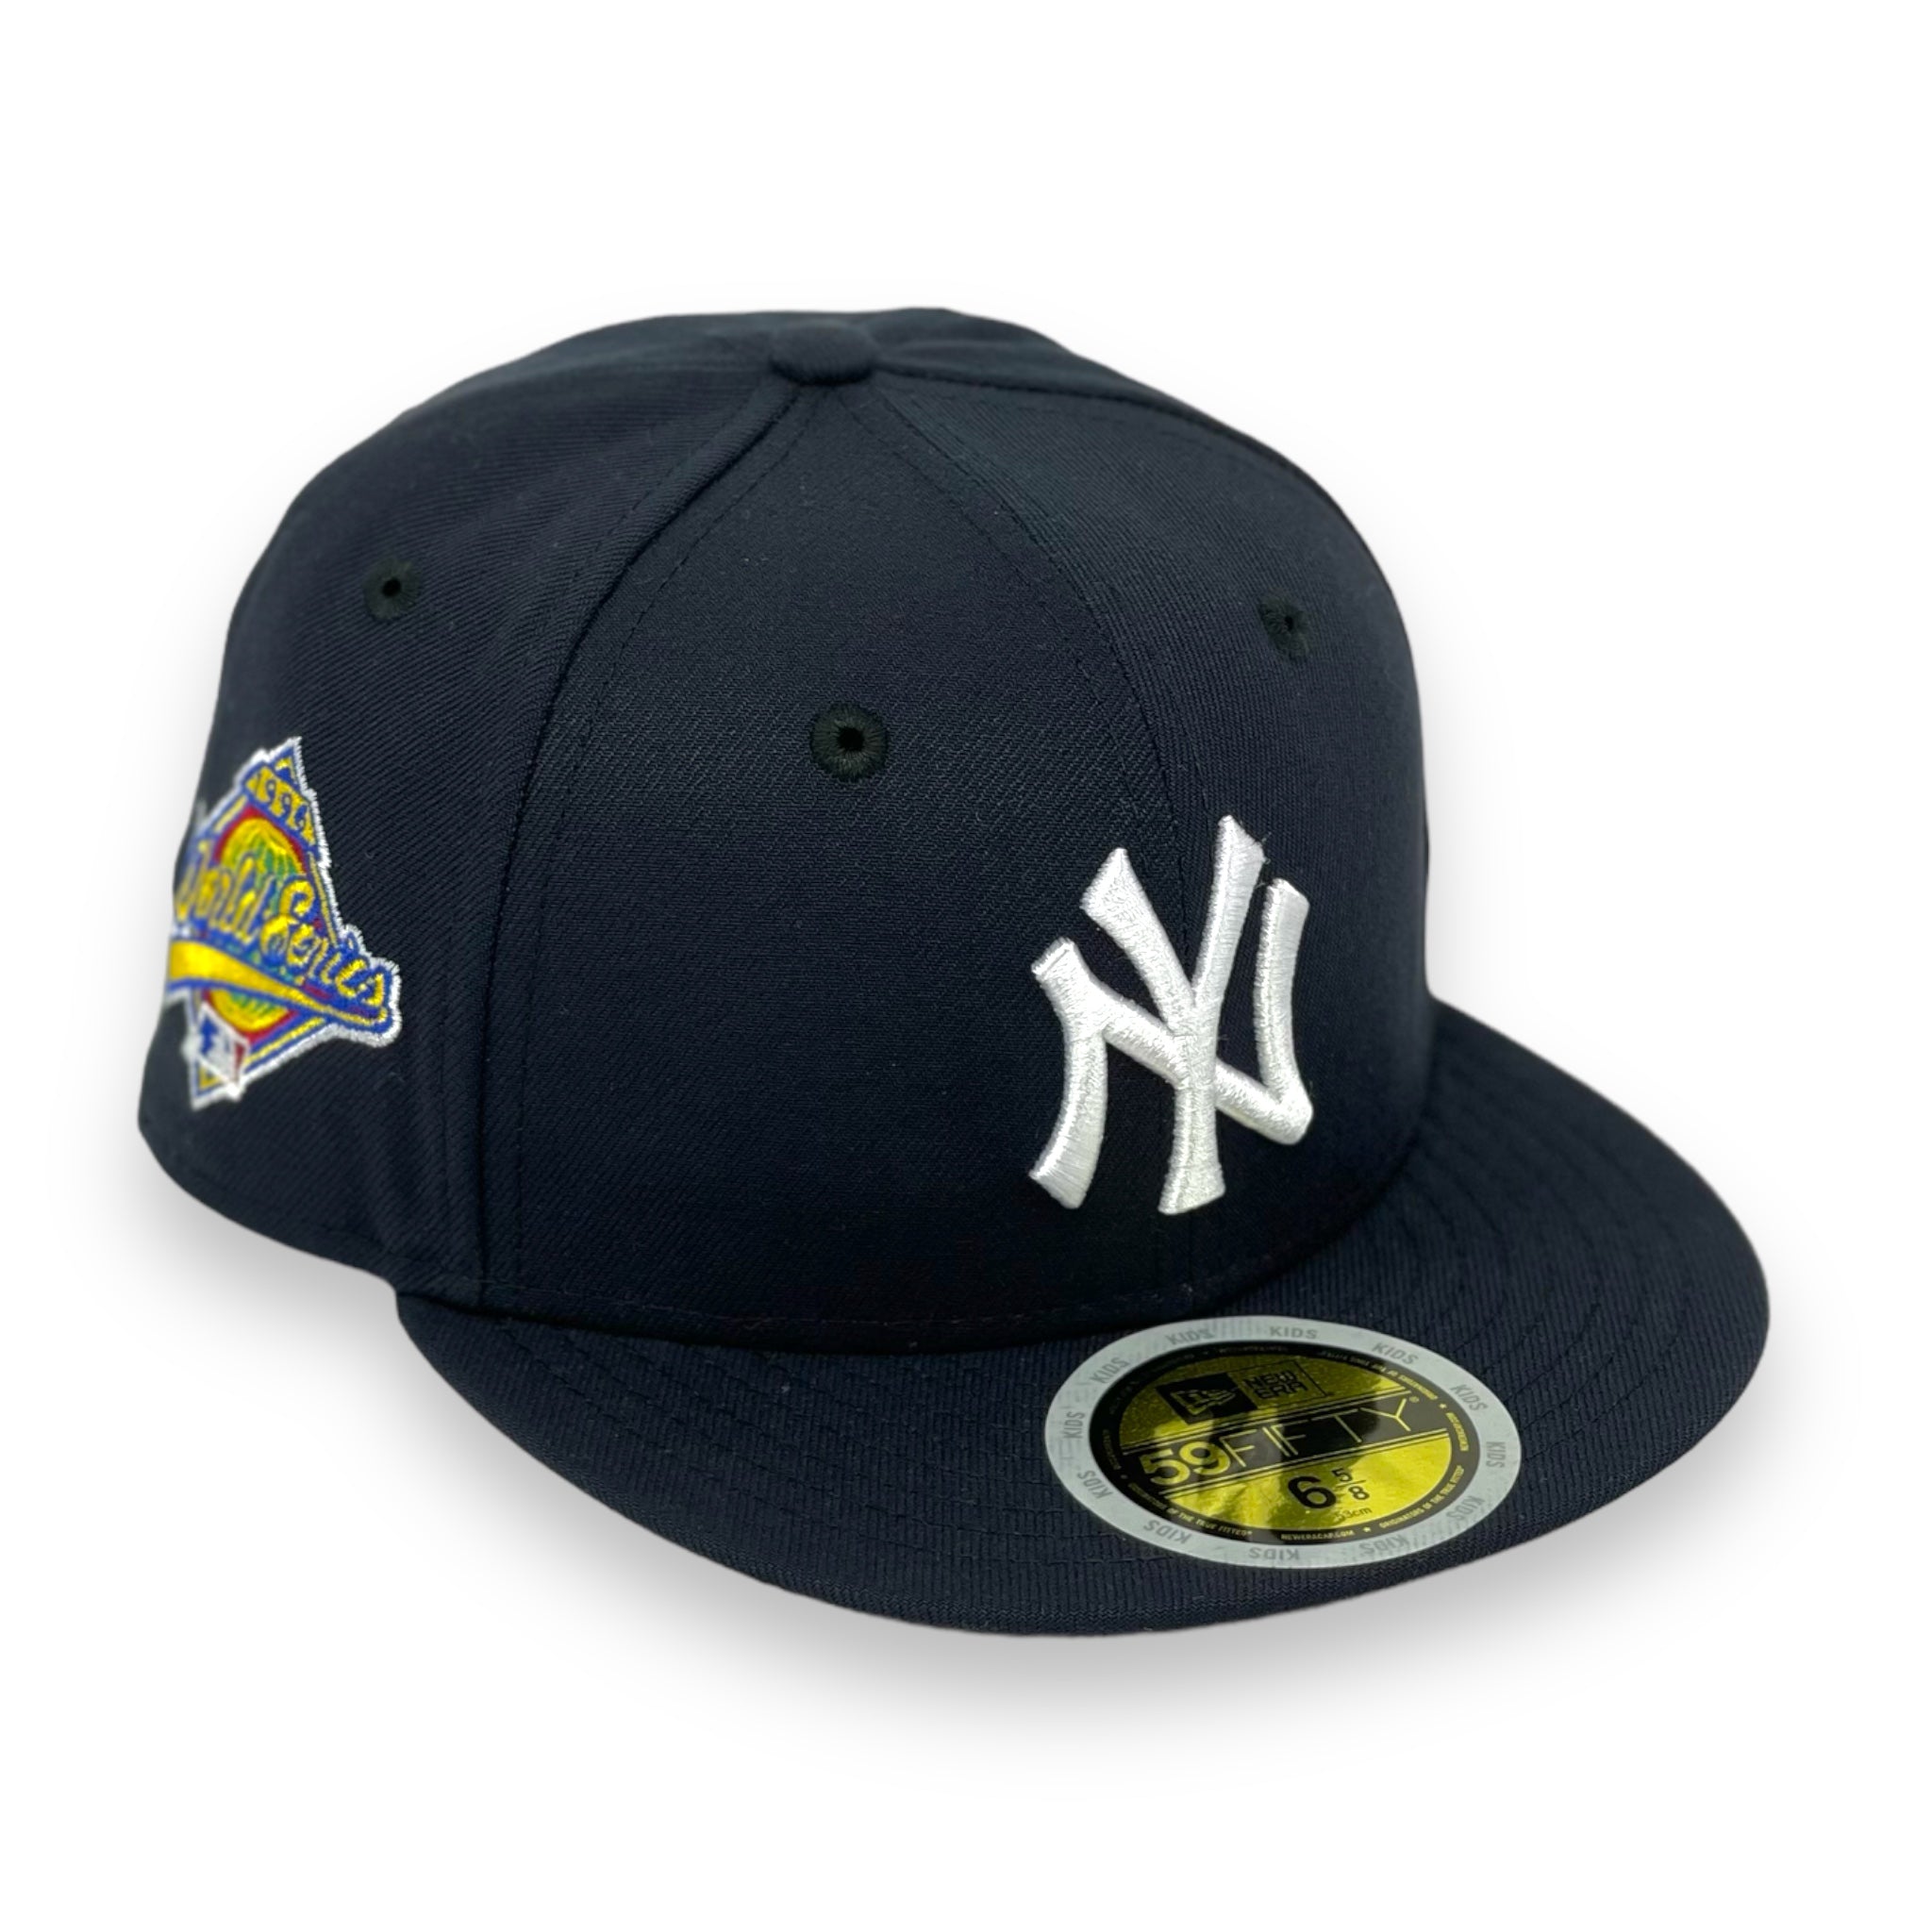 KIDS - NEW YORK YANKEES (1996 WORLD SERIES) NEW ERA 59FIFTY FITTED